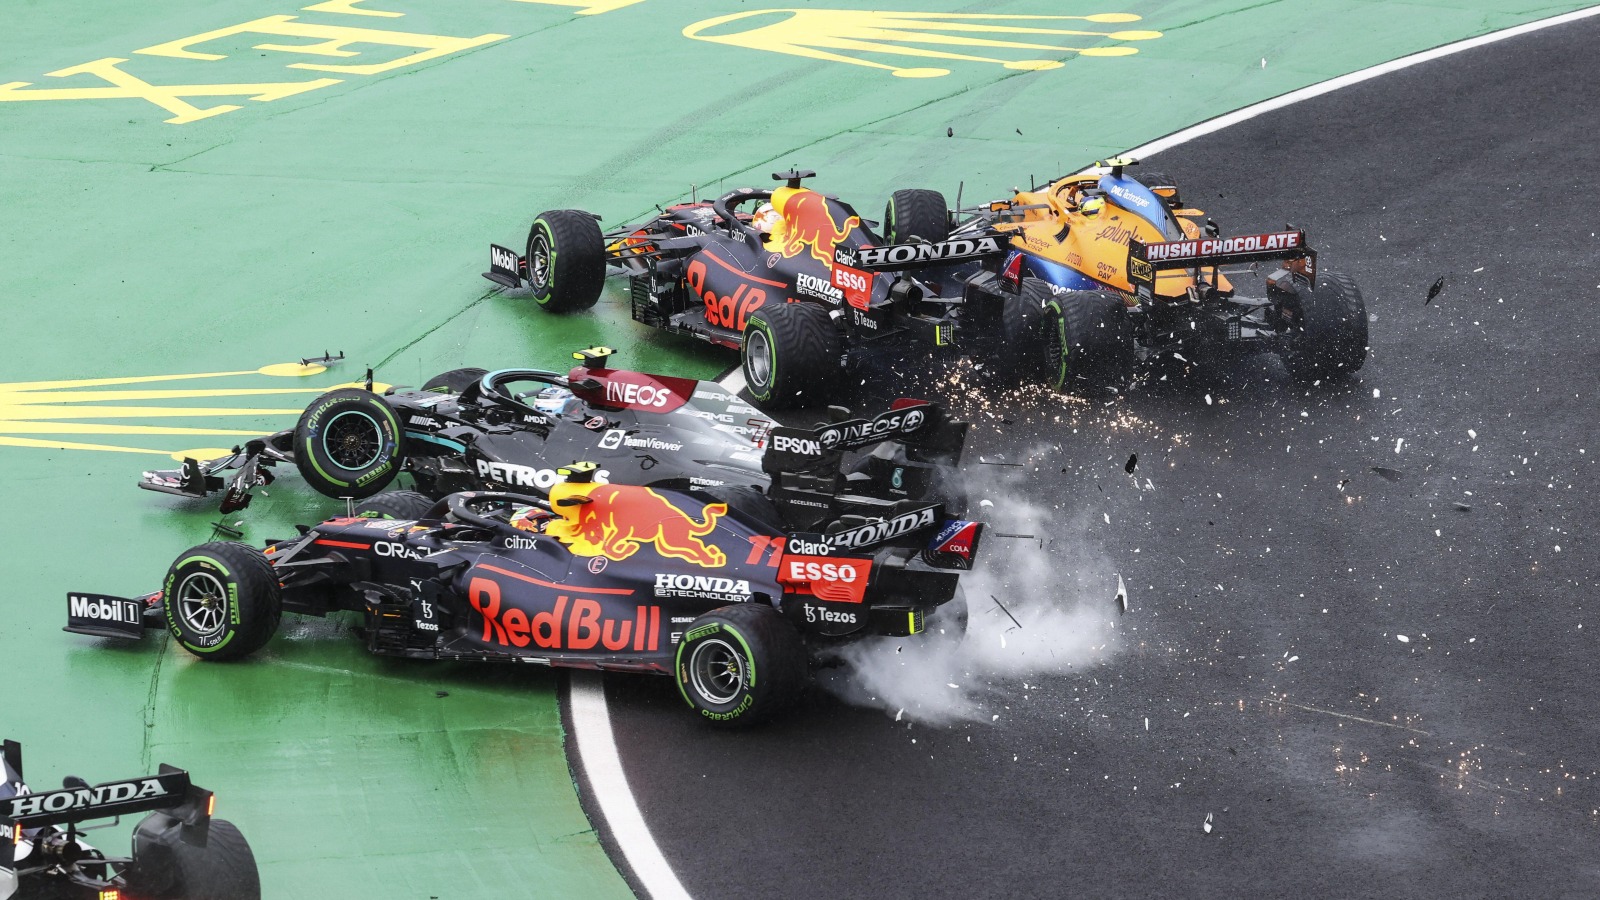 The race start of the 2021 Hungarian Grand Prix.